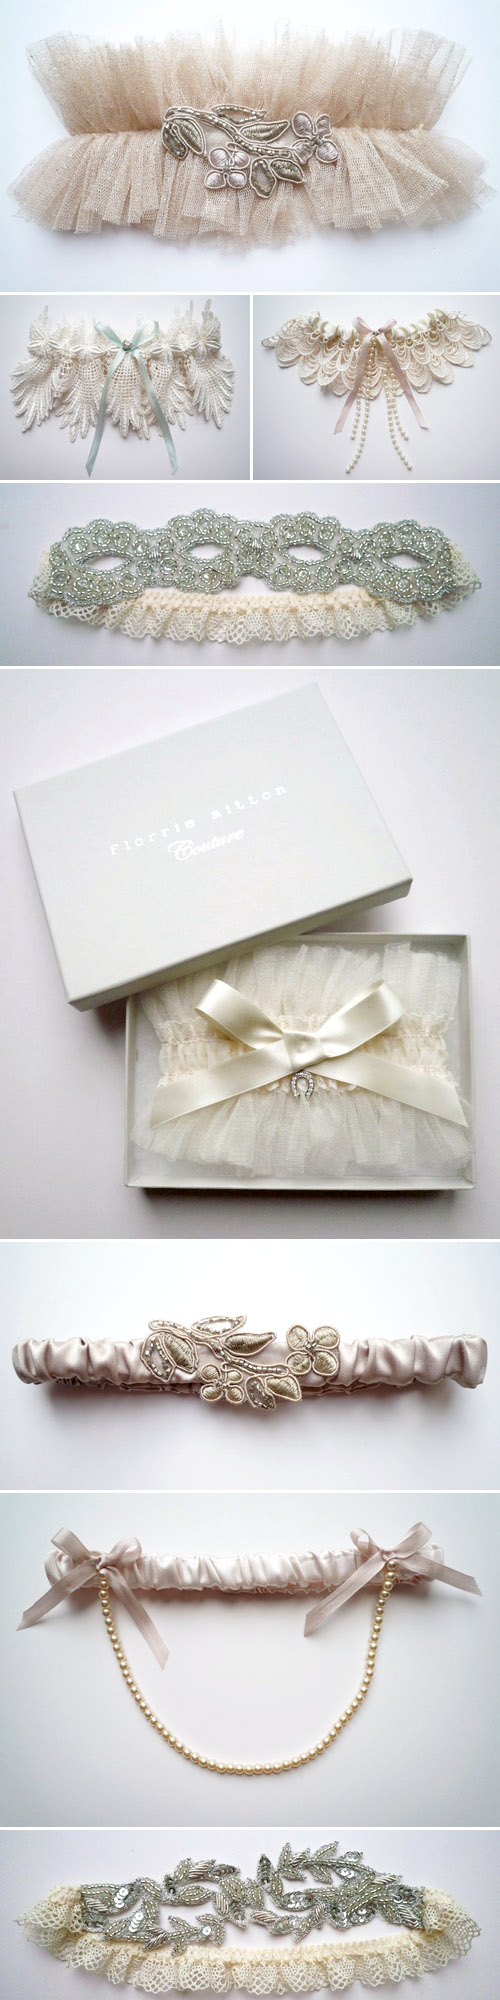 couture bridal garters from Florrie Mitton on Etsy.com